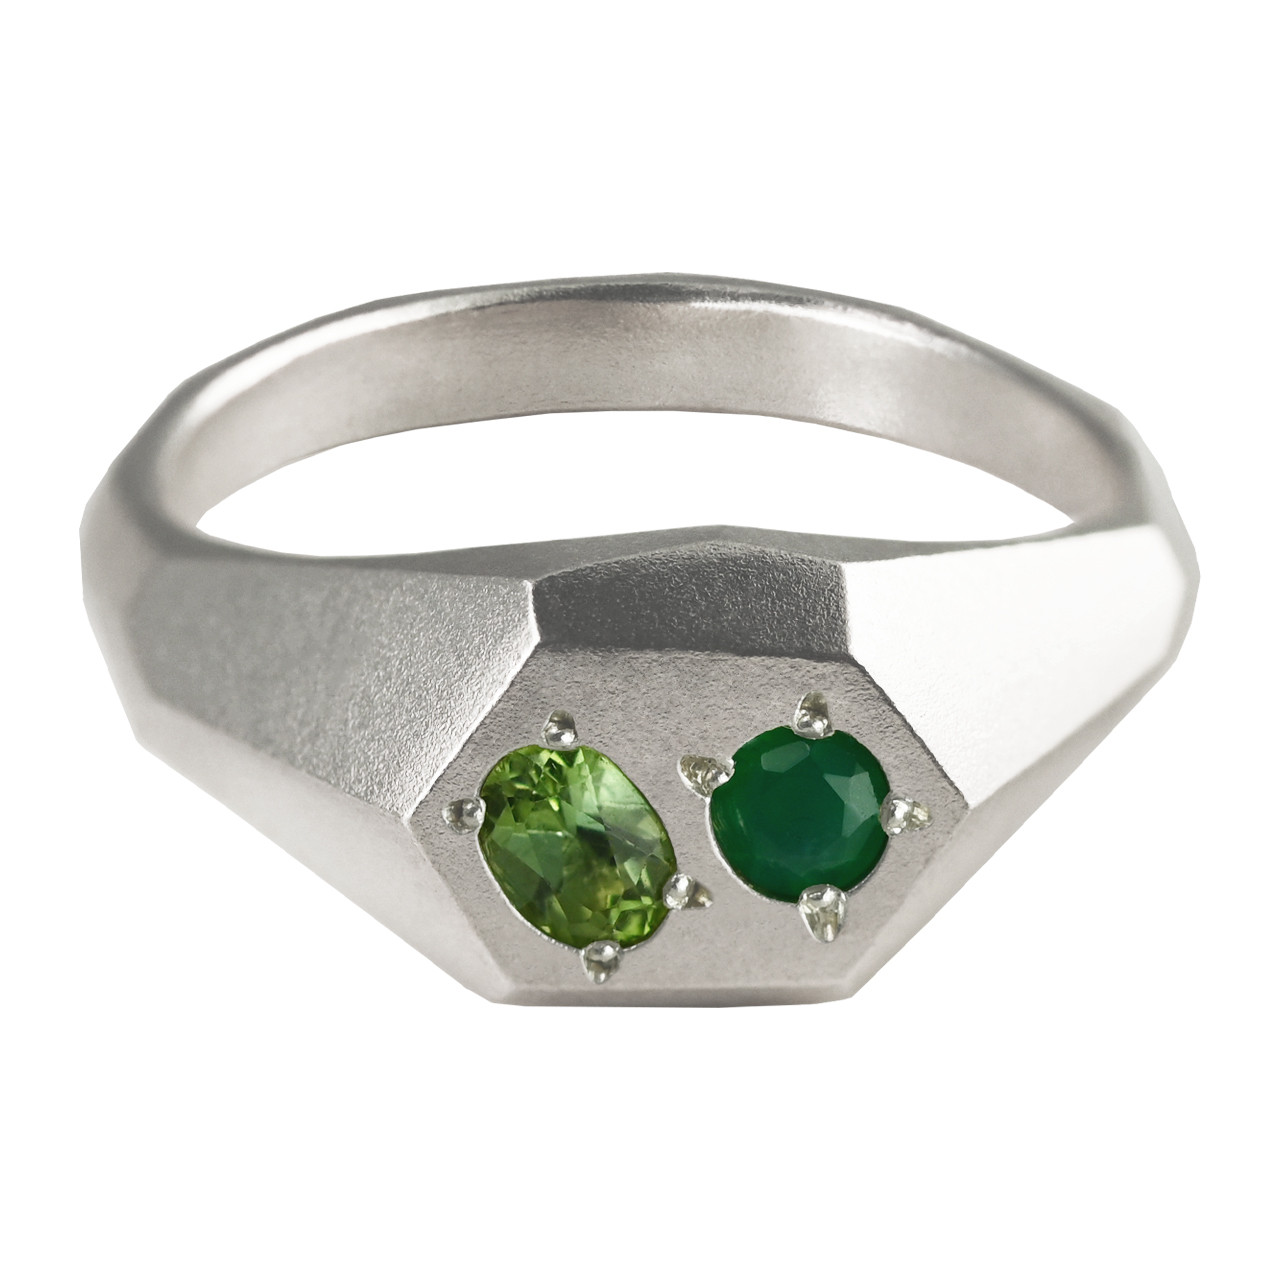 Faceted Signet Ring w. Green Tourmaline & Green Onyx, Maria Manola, tomfoolery